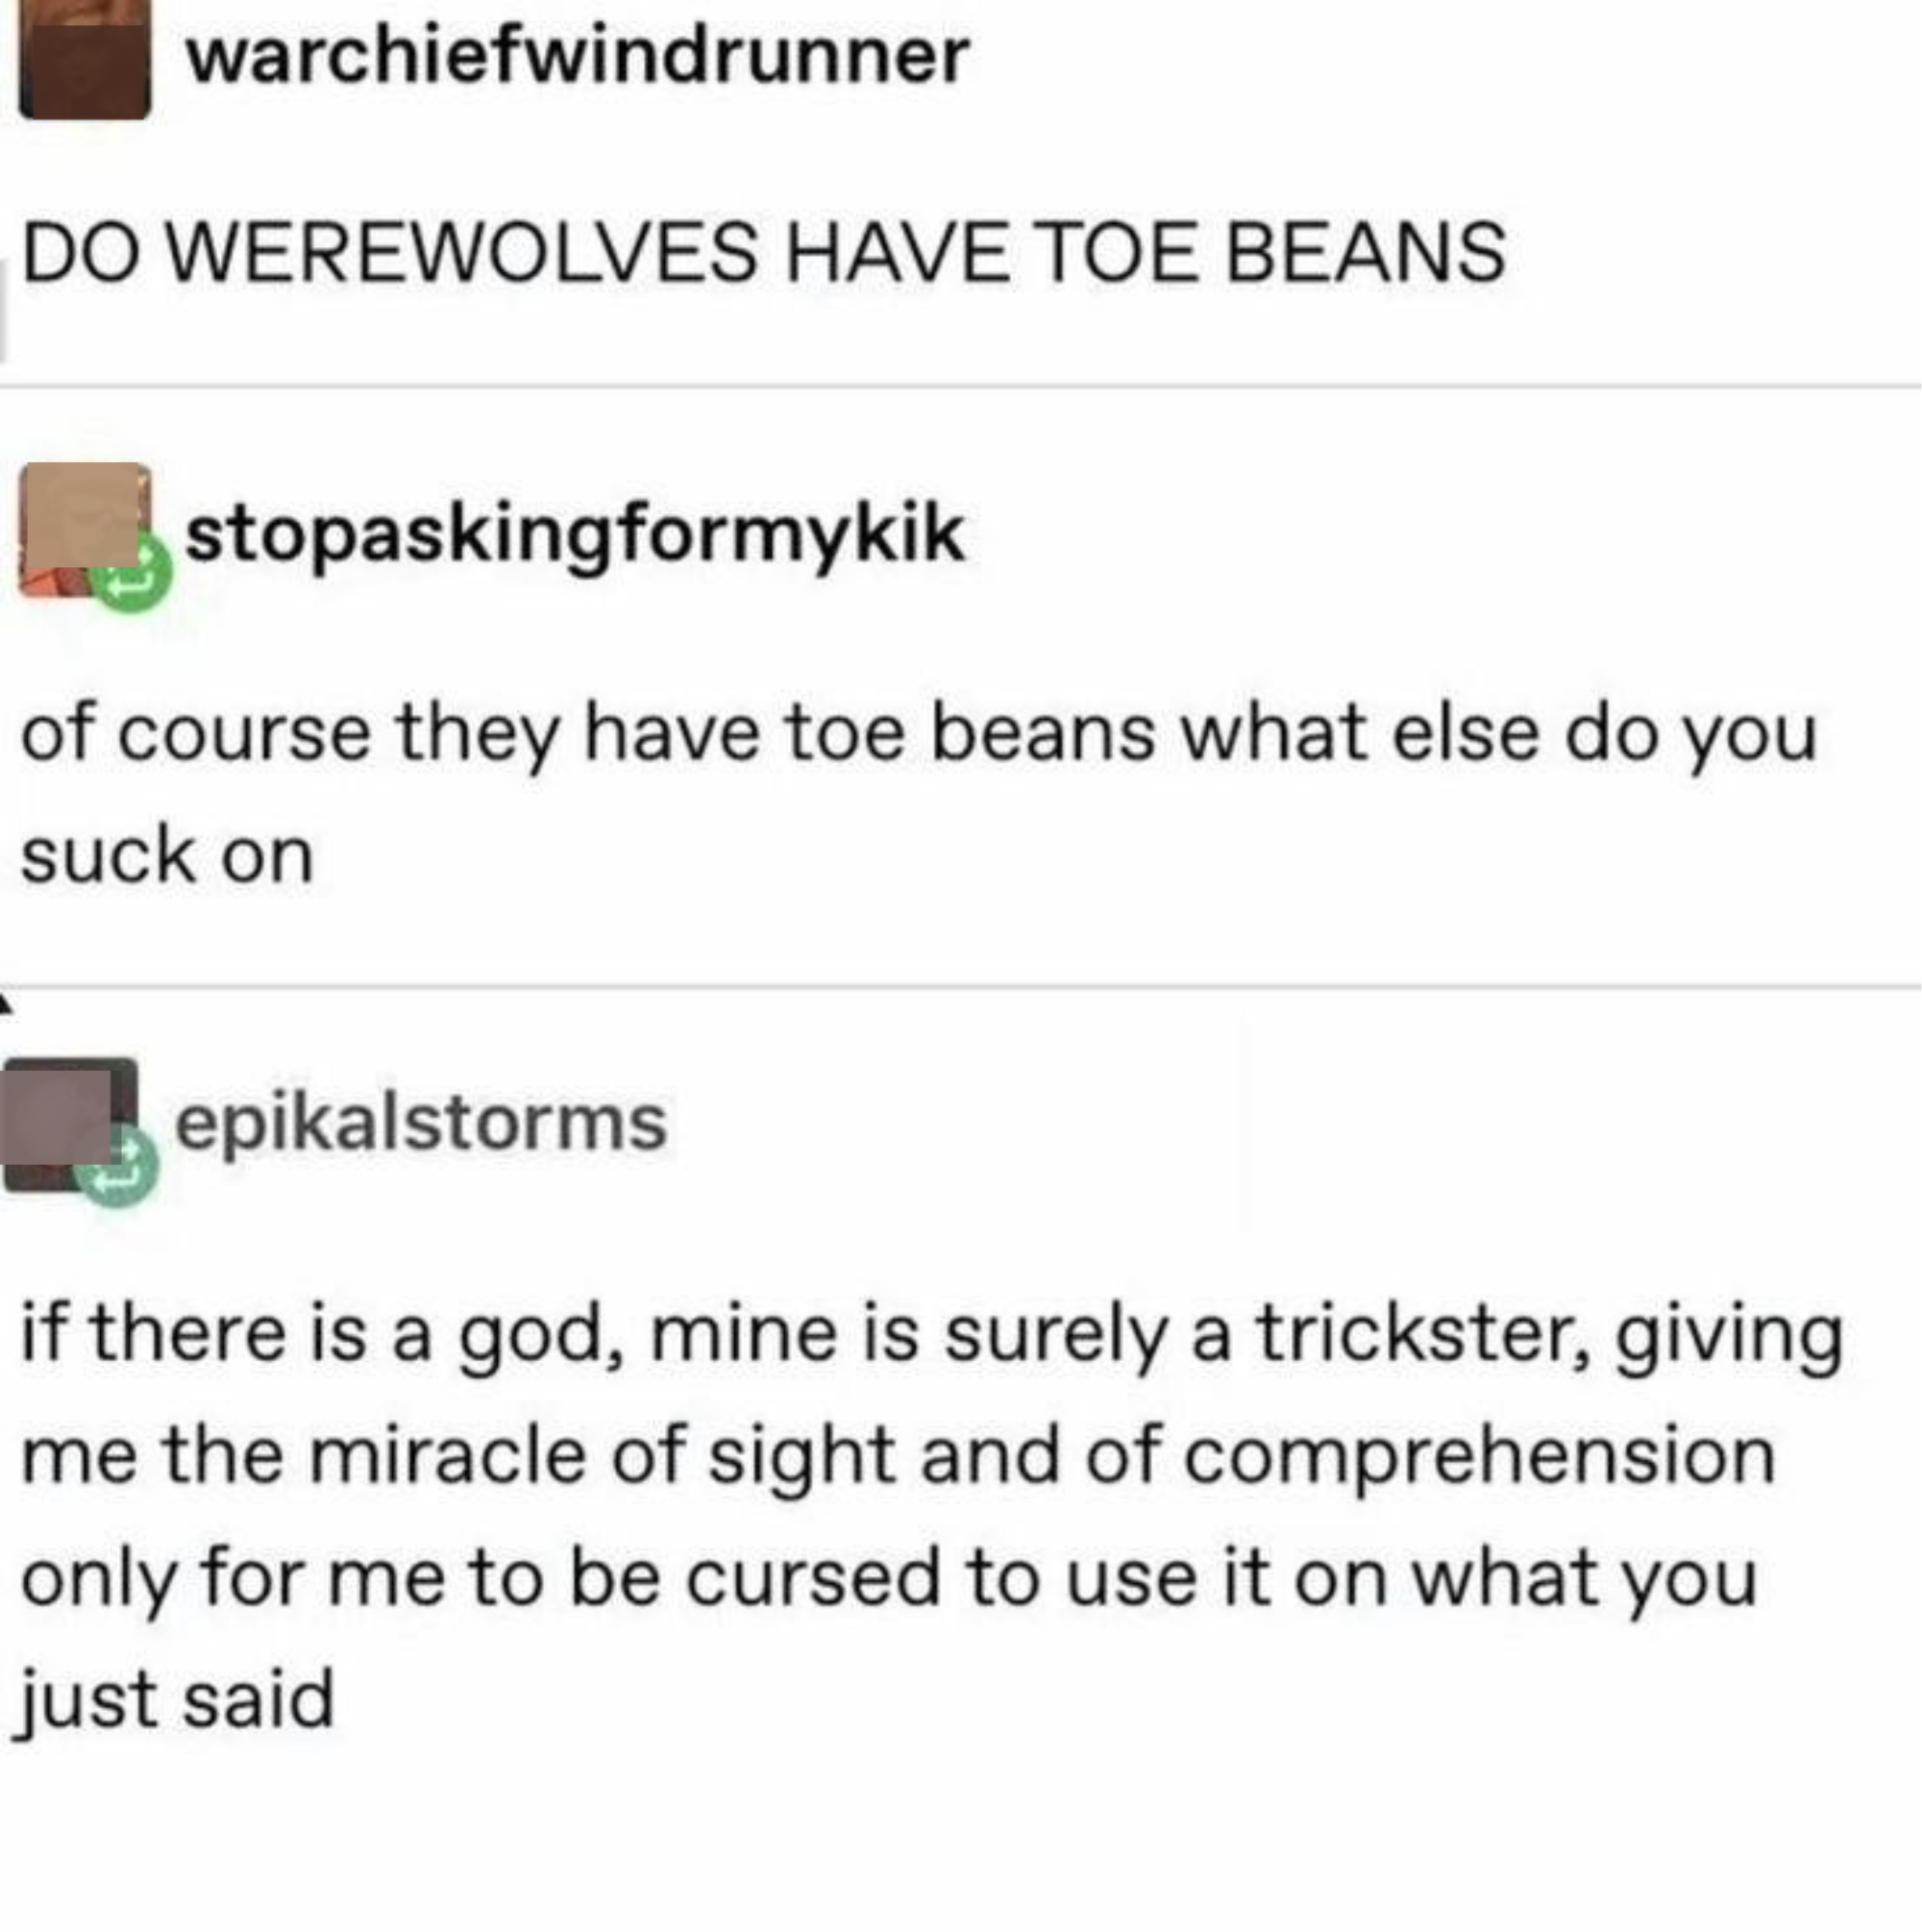 &quot;Do werewolves have toe beans,&quot; &quot;Of course they have toe beans, what else do they suck on,&quot; &quot;If there is a god, mine is surely a trickster, giving me the miracle of sight and of comprehension, only for me to be cursed to use it on what you just said&quot;